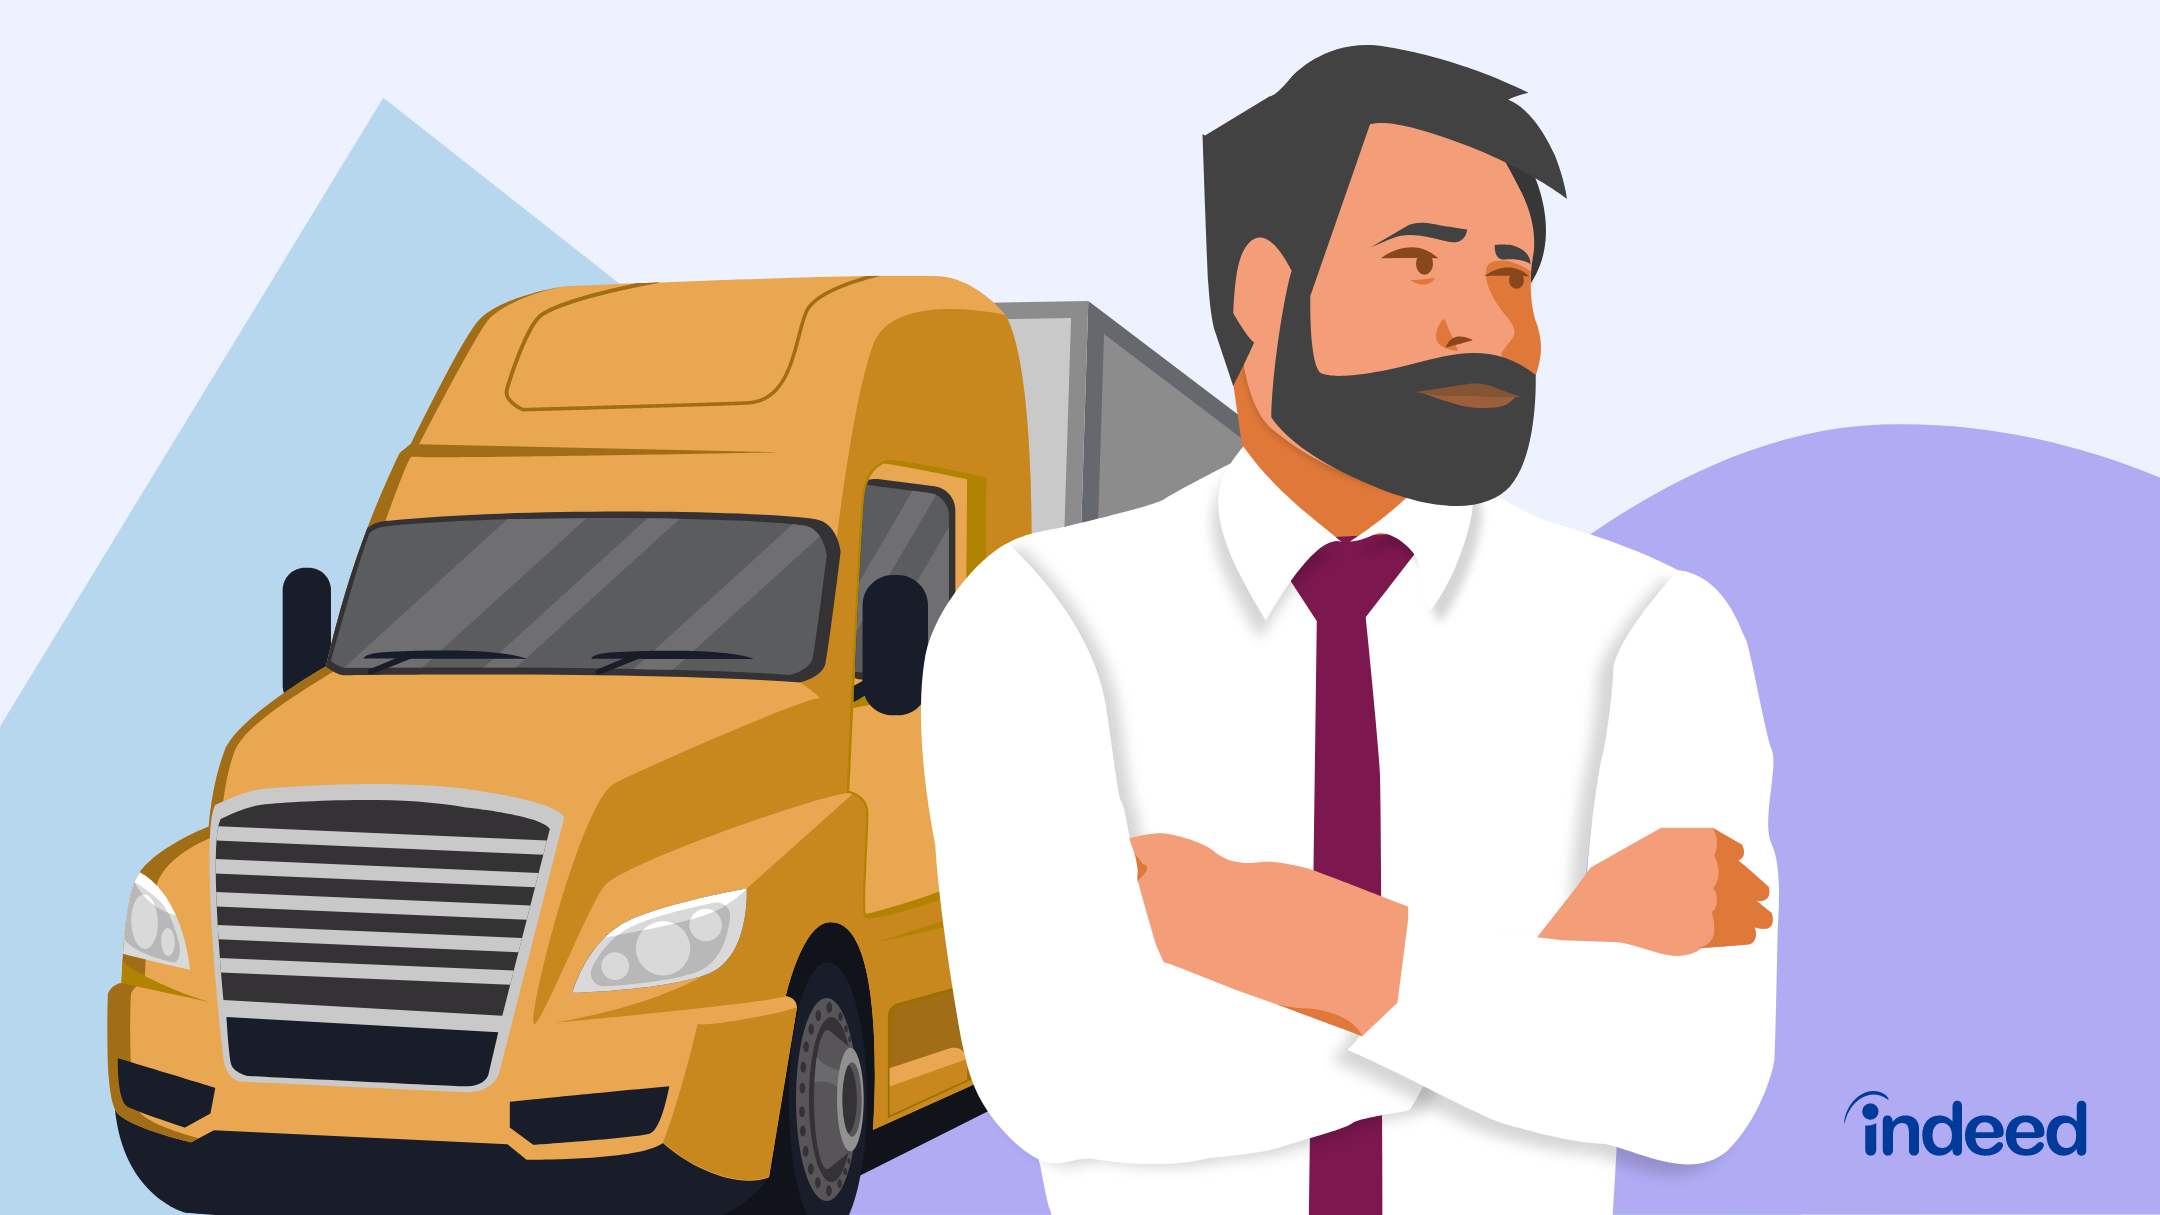 Do You Have What it Takes to Drive? Essential Skills for Successful Trucking